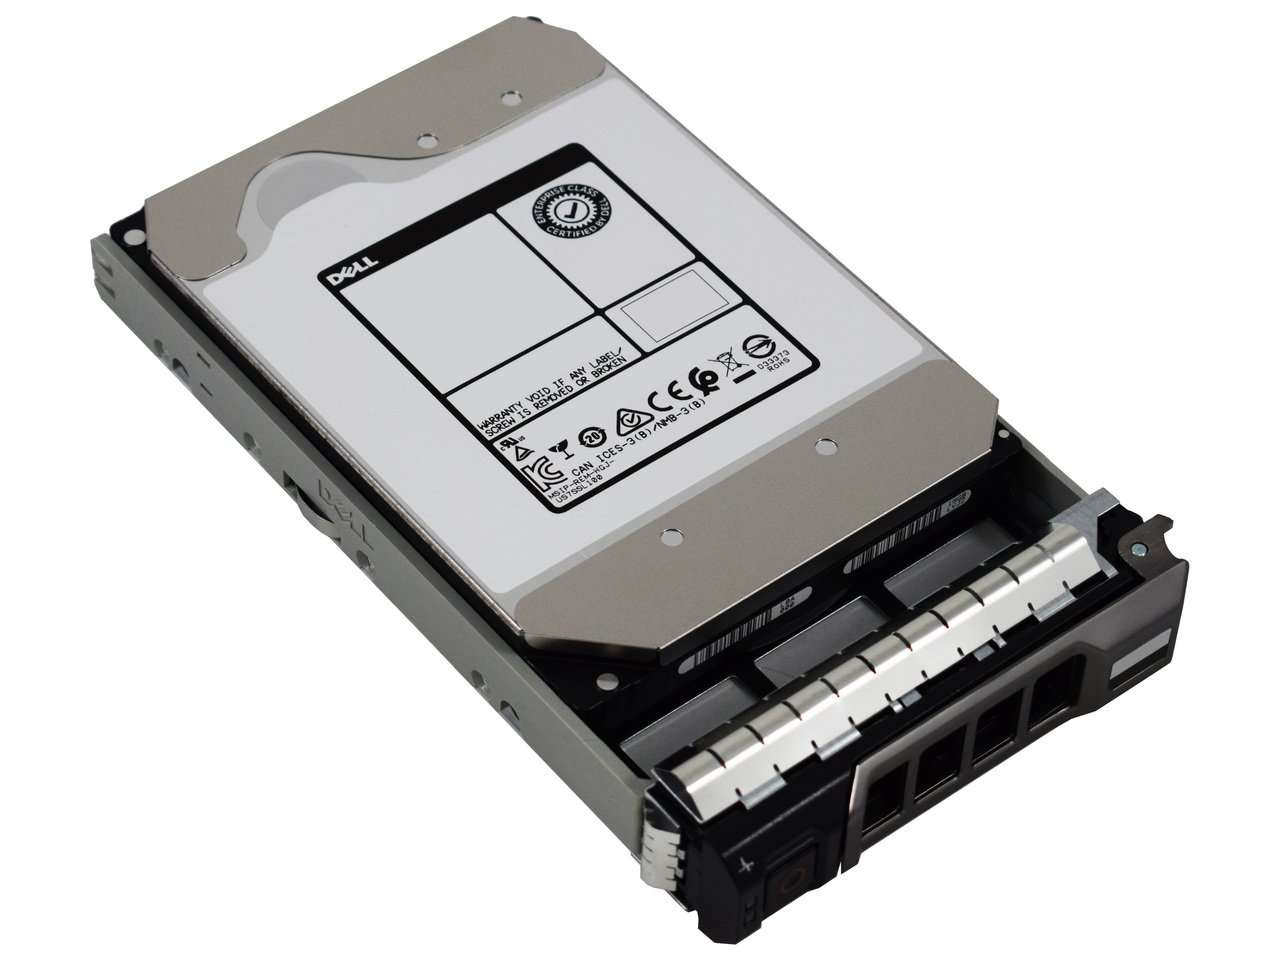 Dell G13 0CGMFR 10TB 7.2K RPM SAS 12Gb/s 512e 3.5" NearLine Manufacturer Recertified HDD